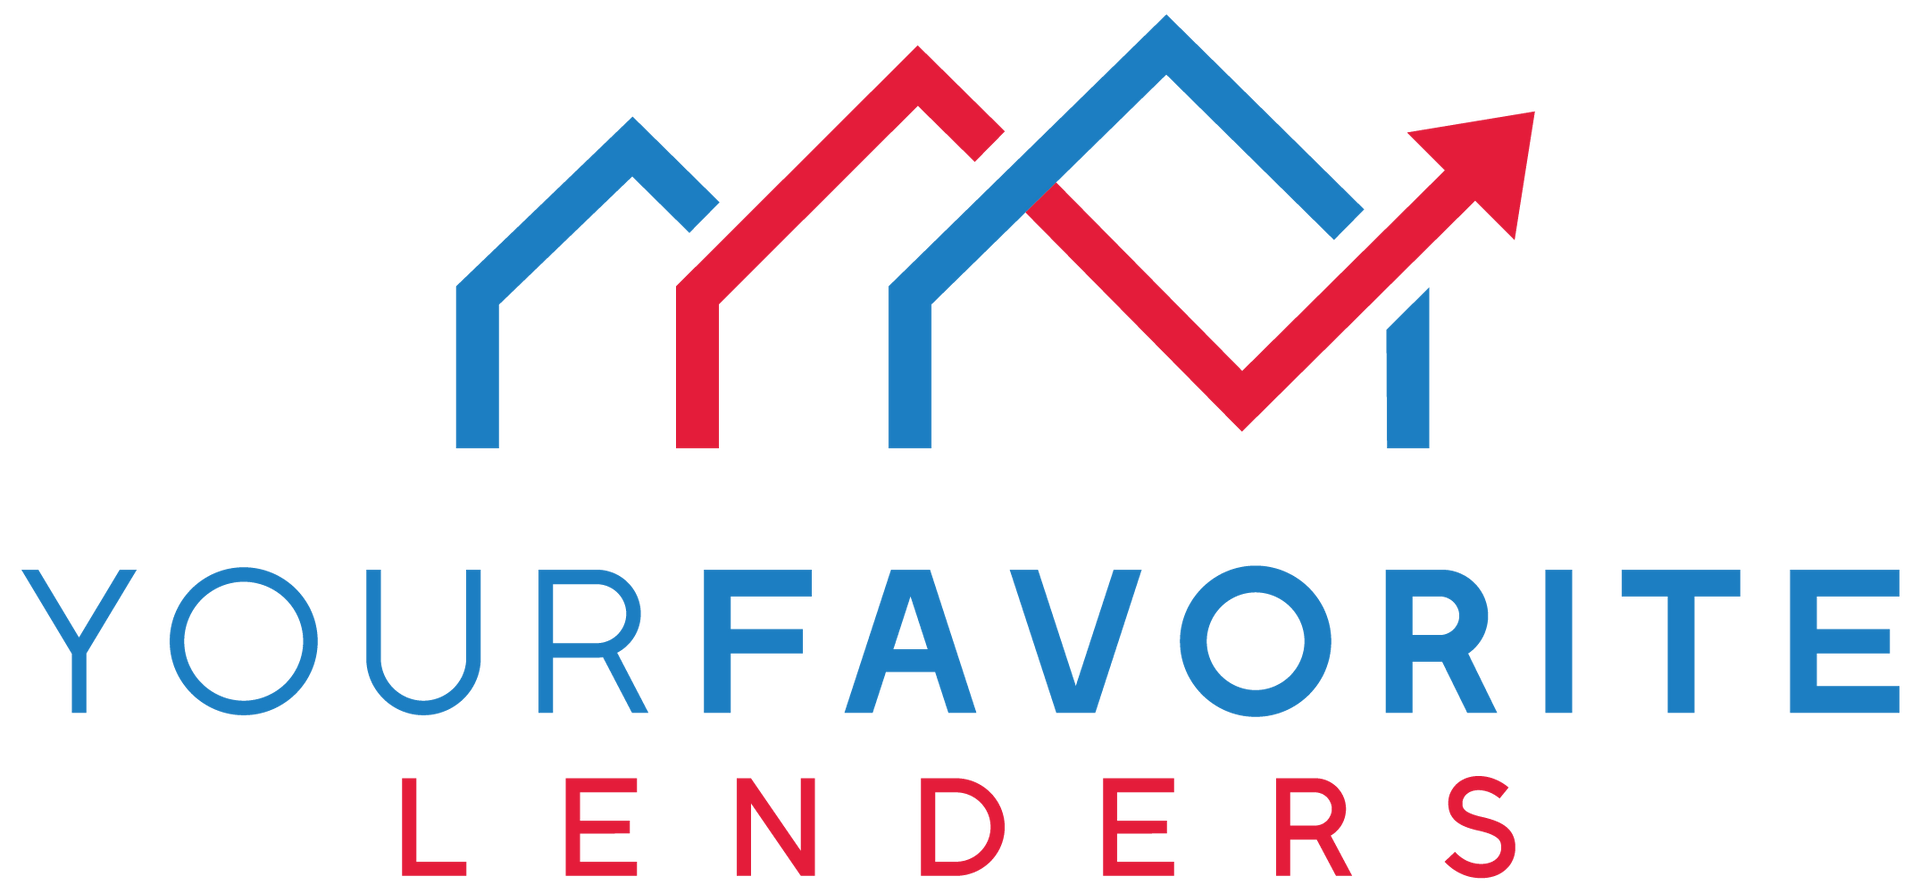 A logo for a company called your favorite lenders